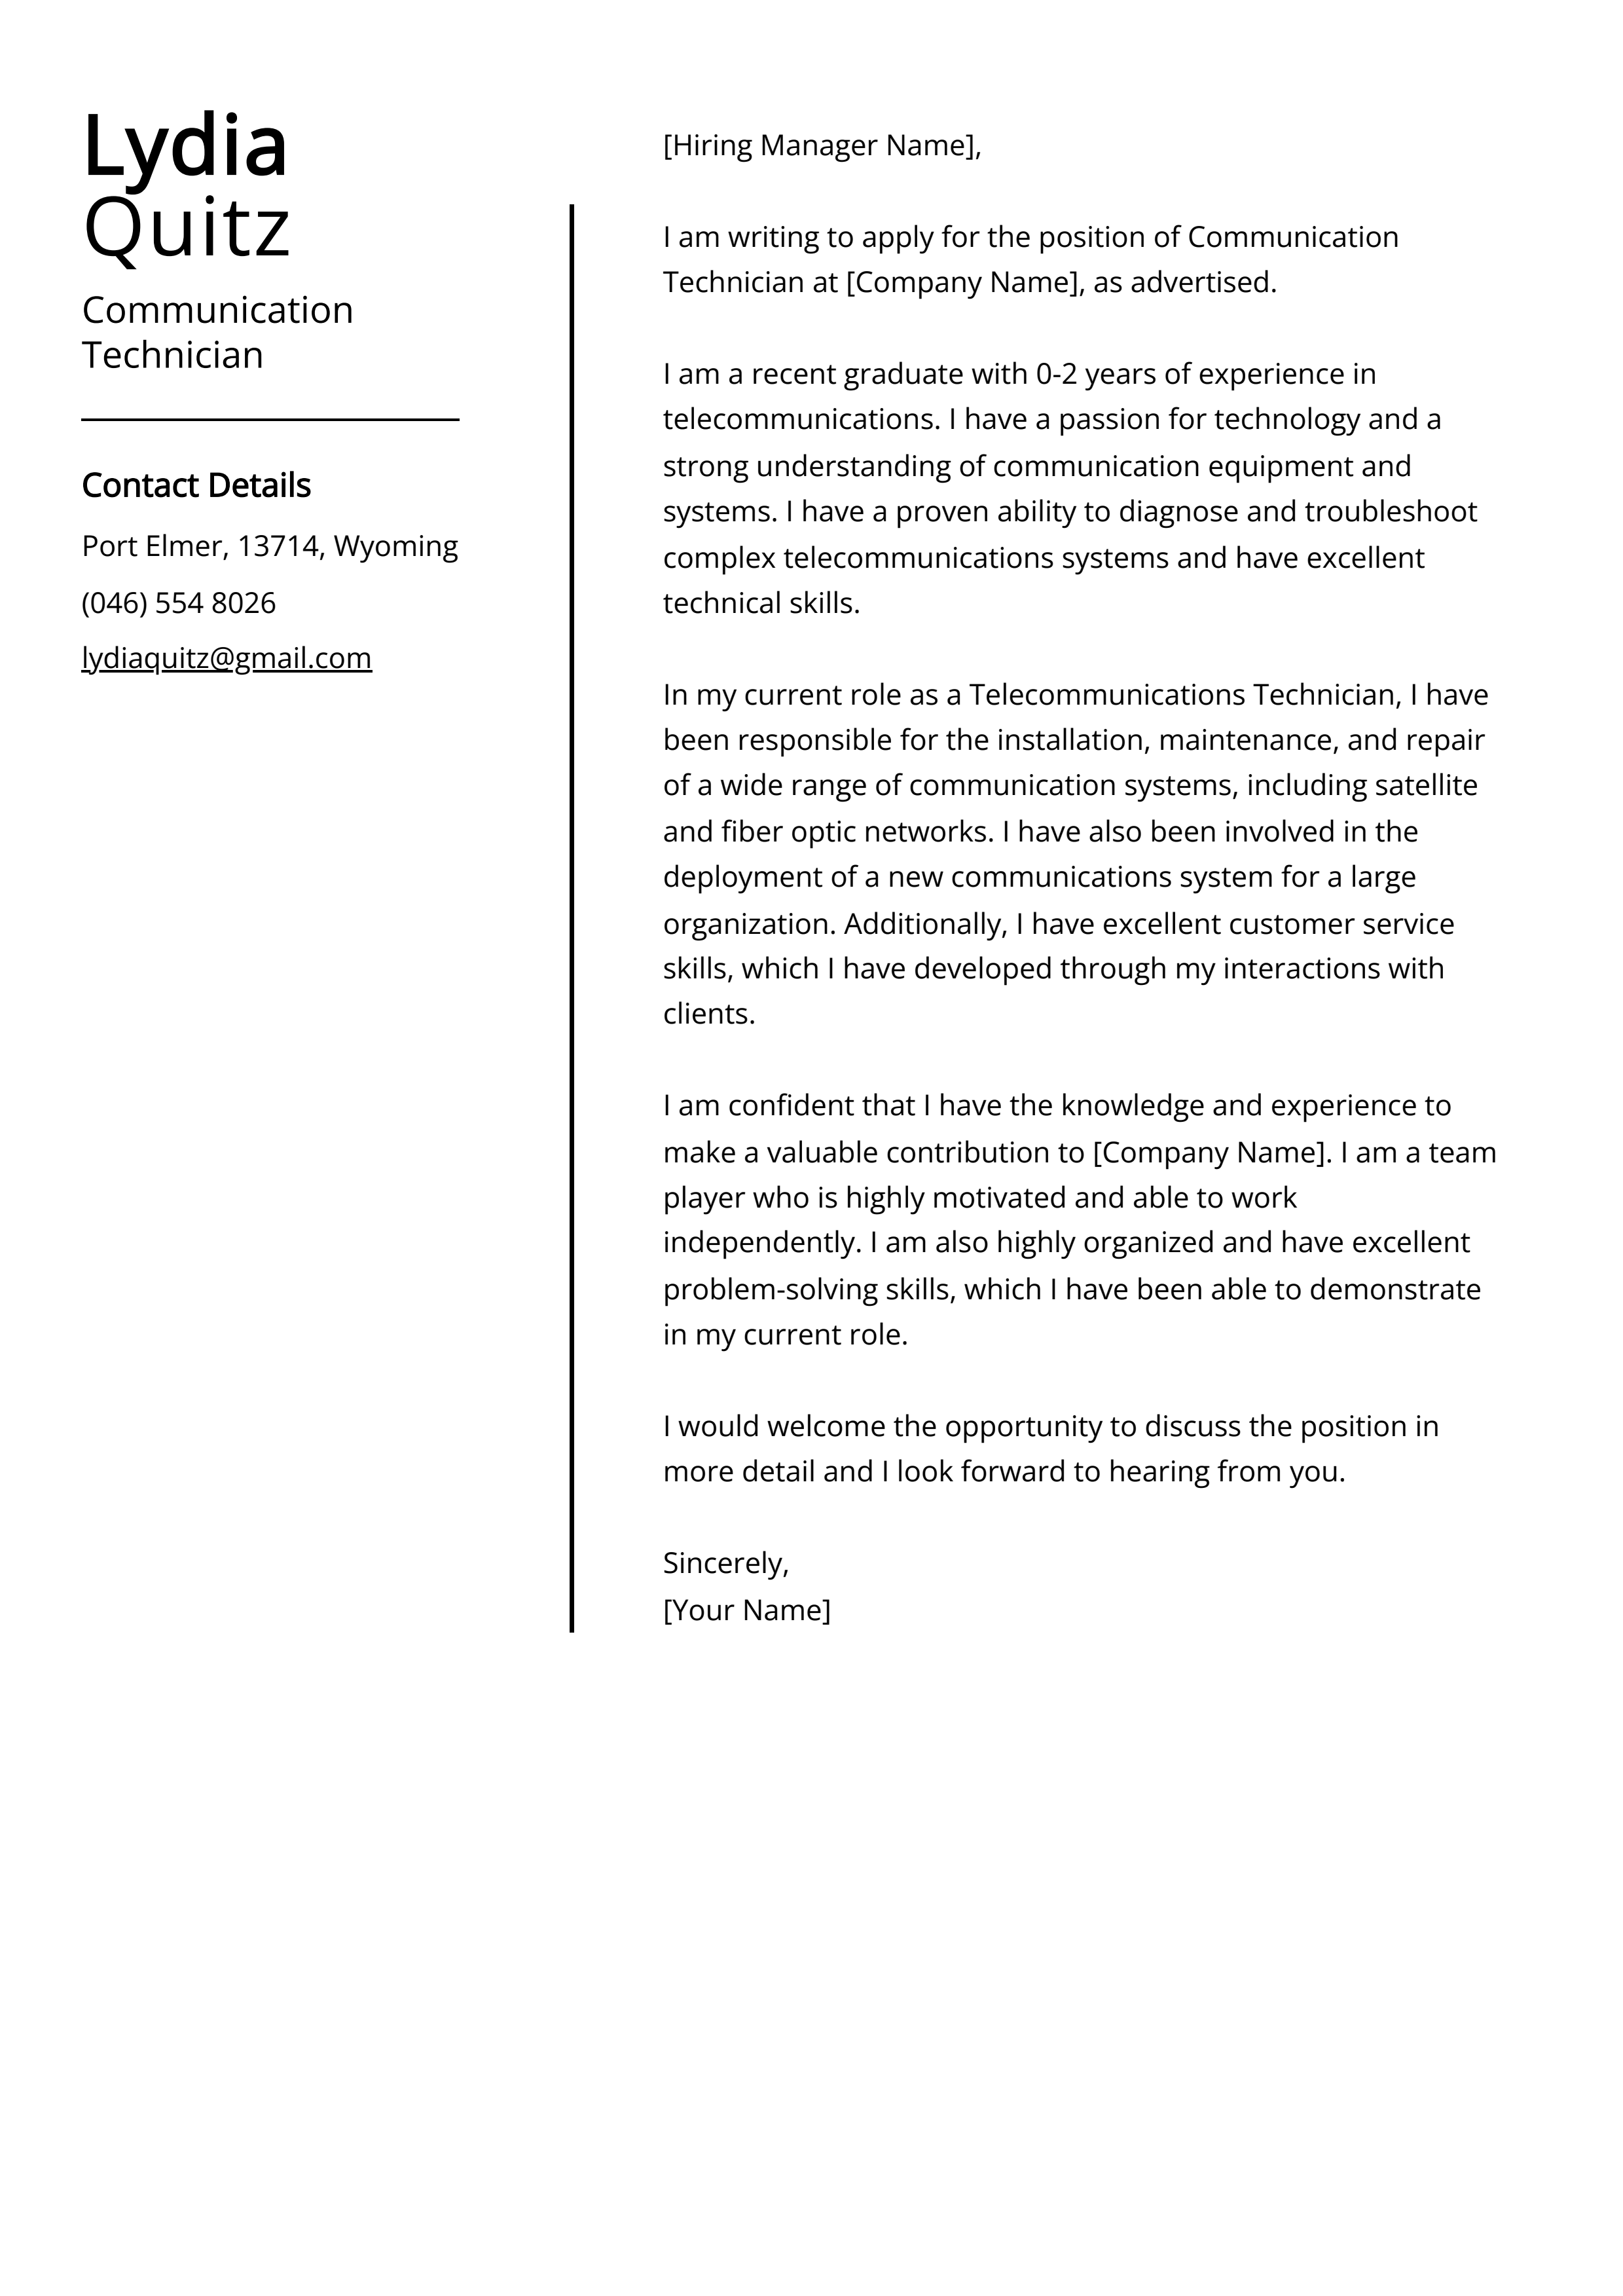 Communication Technician Cover Letter Example